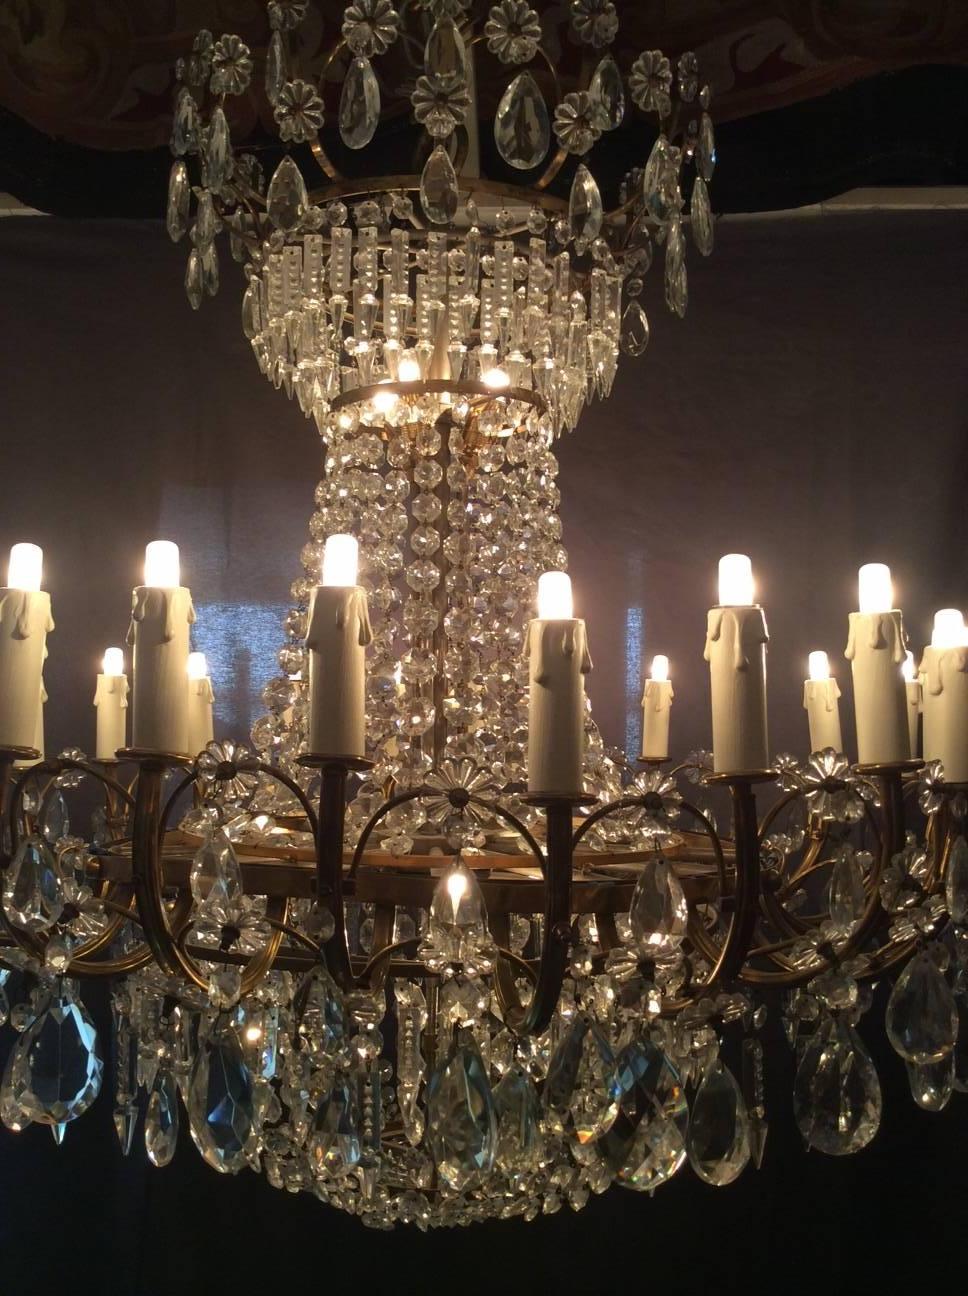 Mid-20th Century Crystal Chandelier with 24 Arms of Light, France, circa 1940